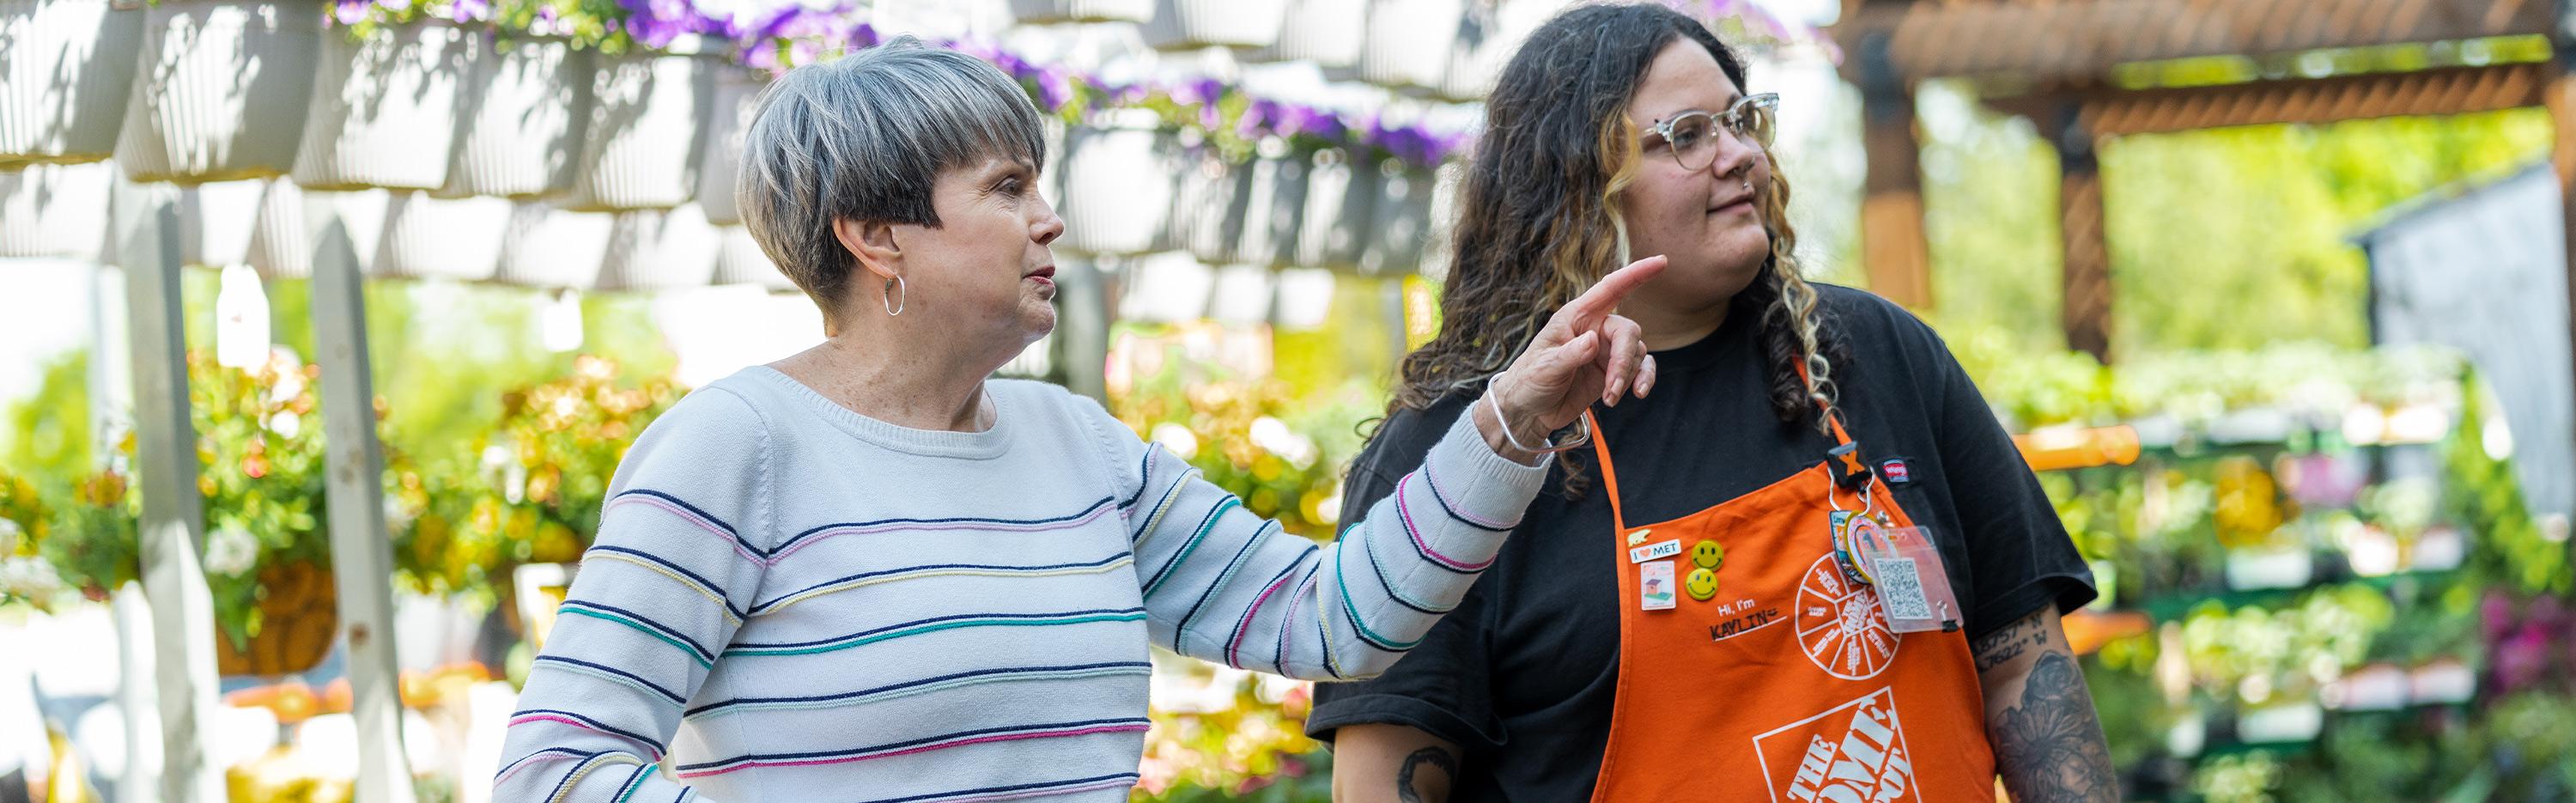 Associate and customer in the garden section